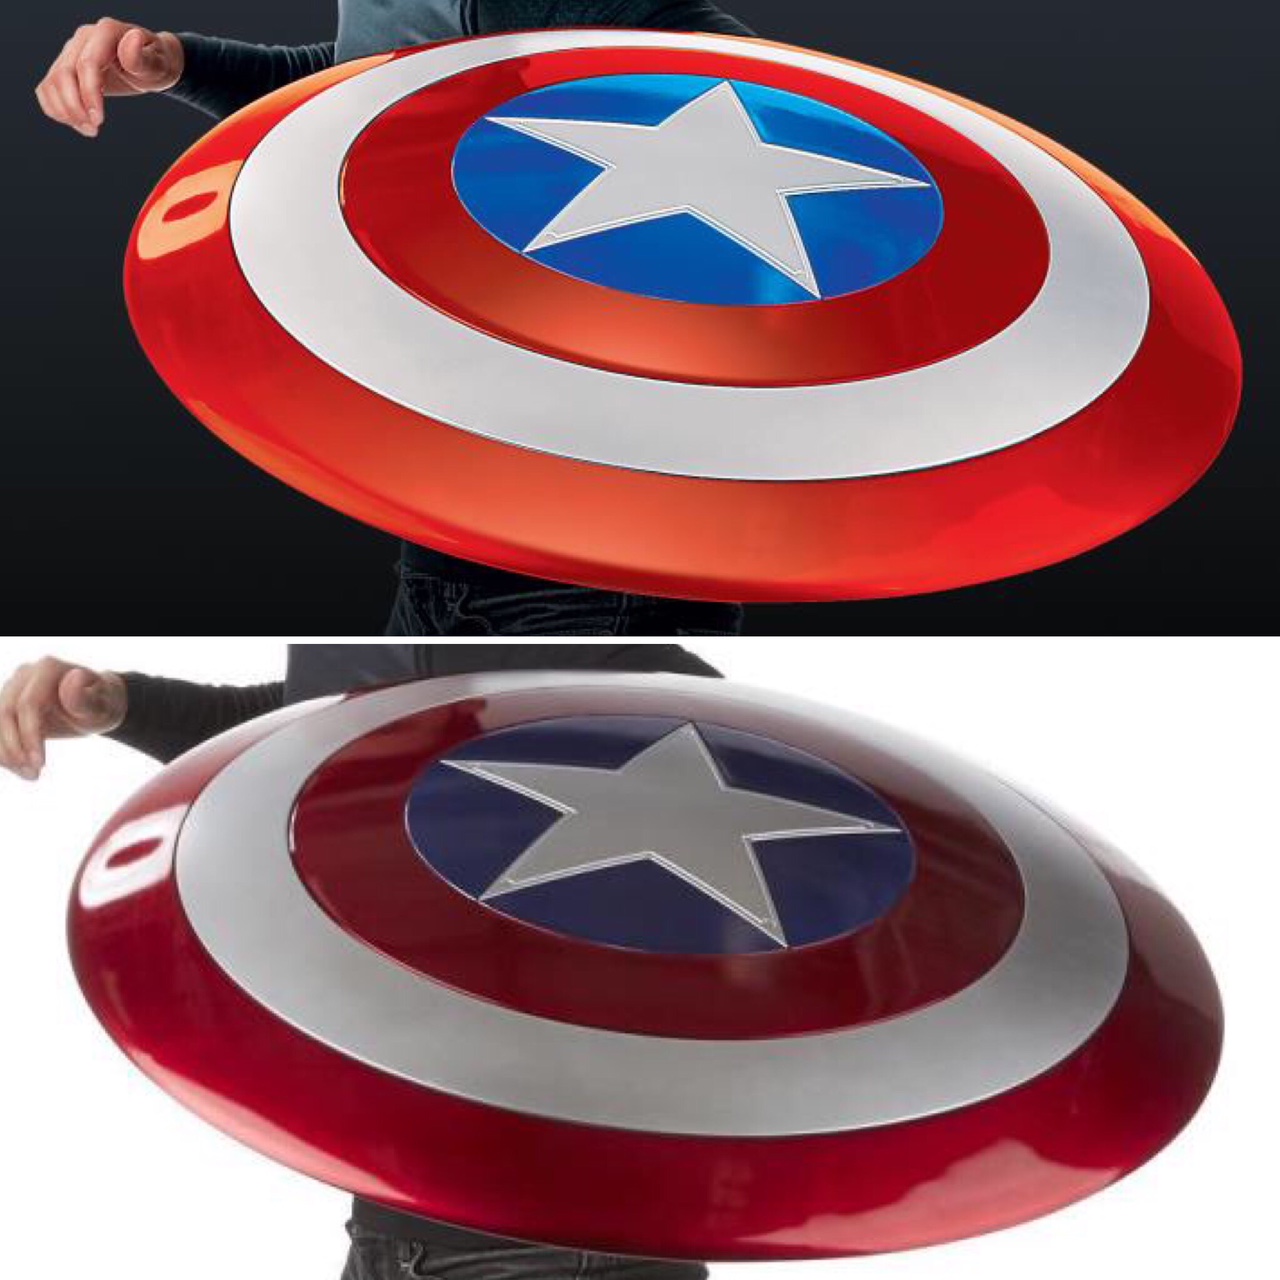 CAPTAIN AMERICA'S SHIELD - How To 